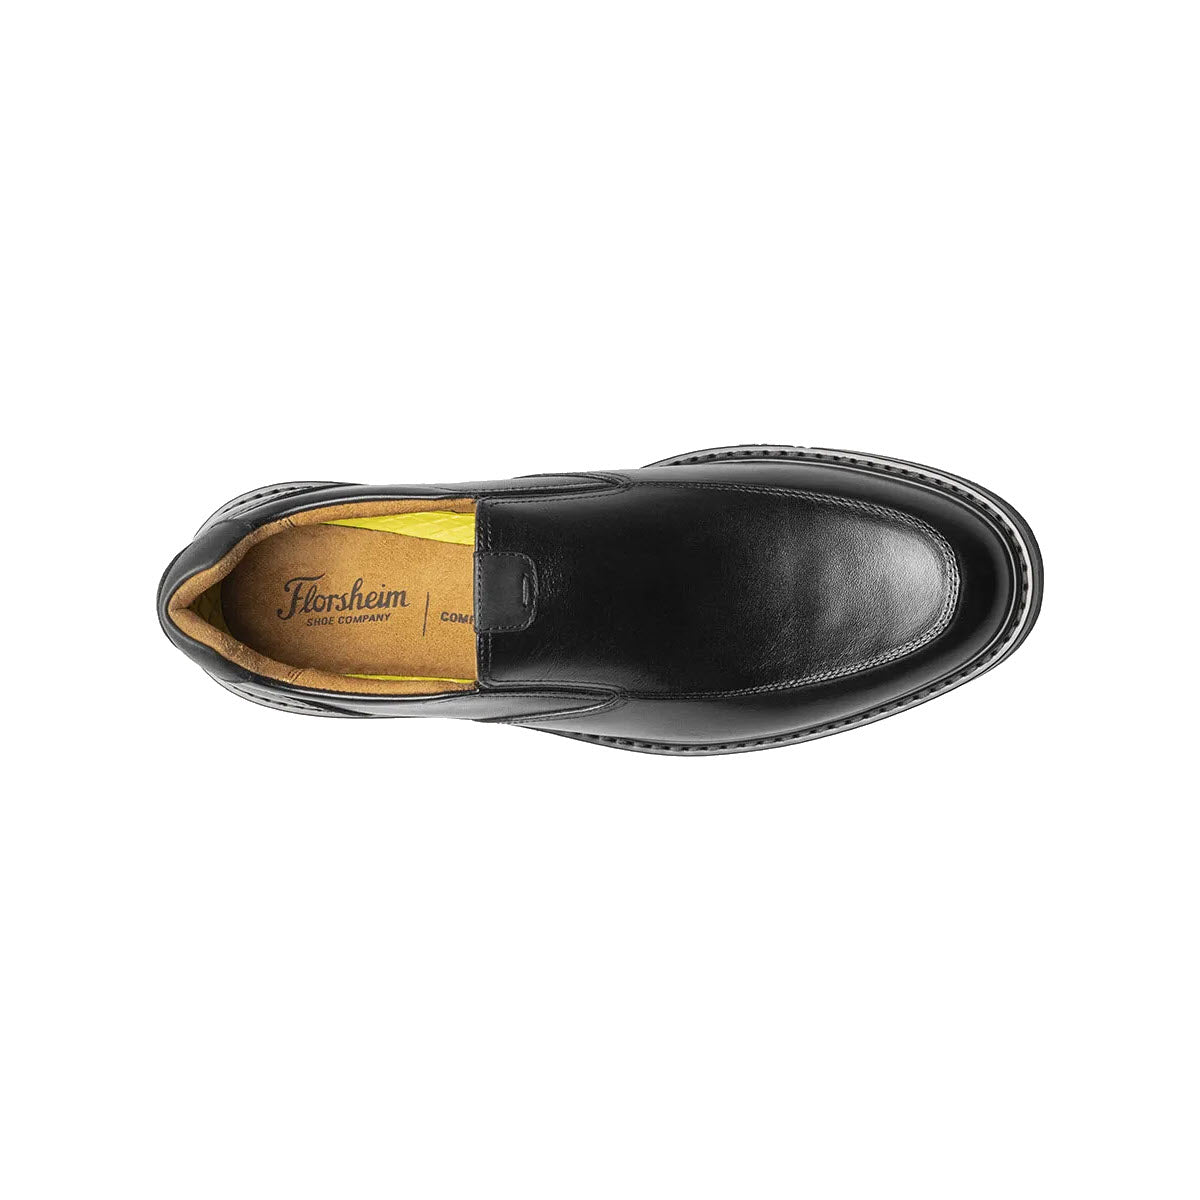 Top view of a black leather FLORSHEIM NORWALK MOC TOE SLIP ON BLACK - MENS loafer with visible Florsheim brand name on the insole.